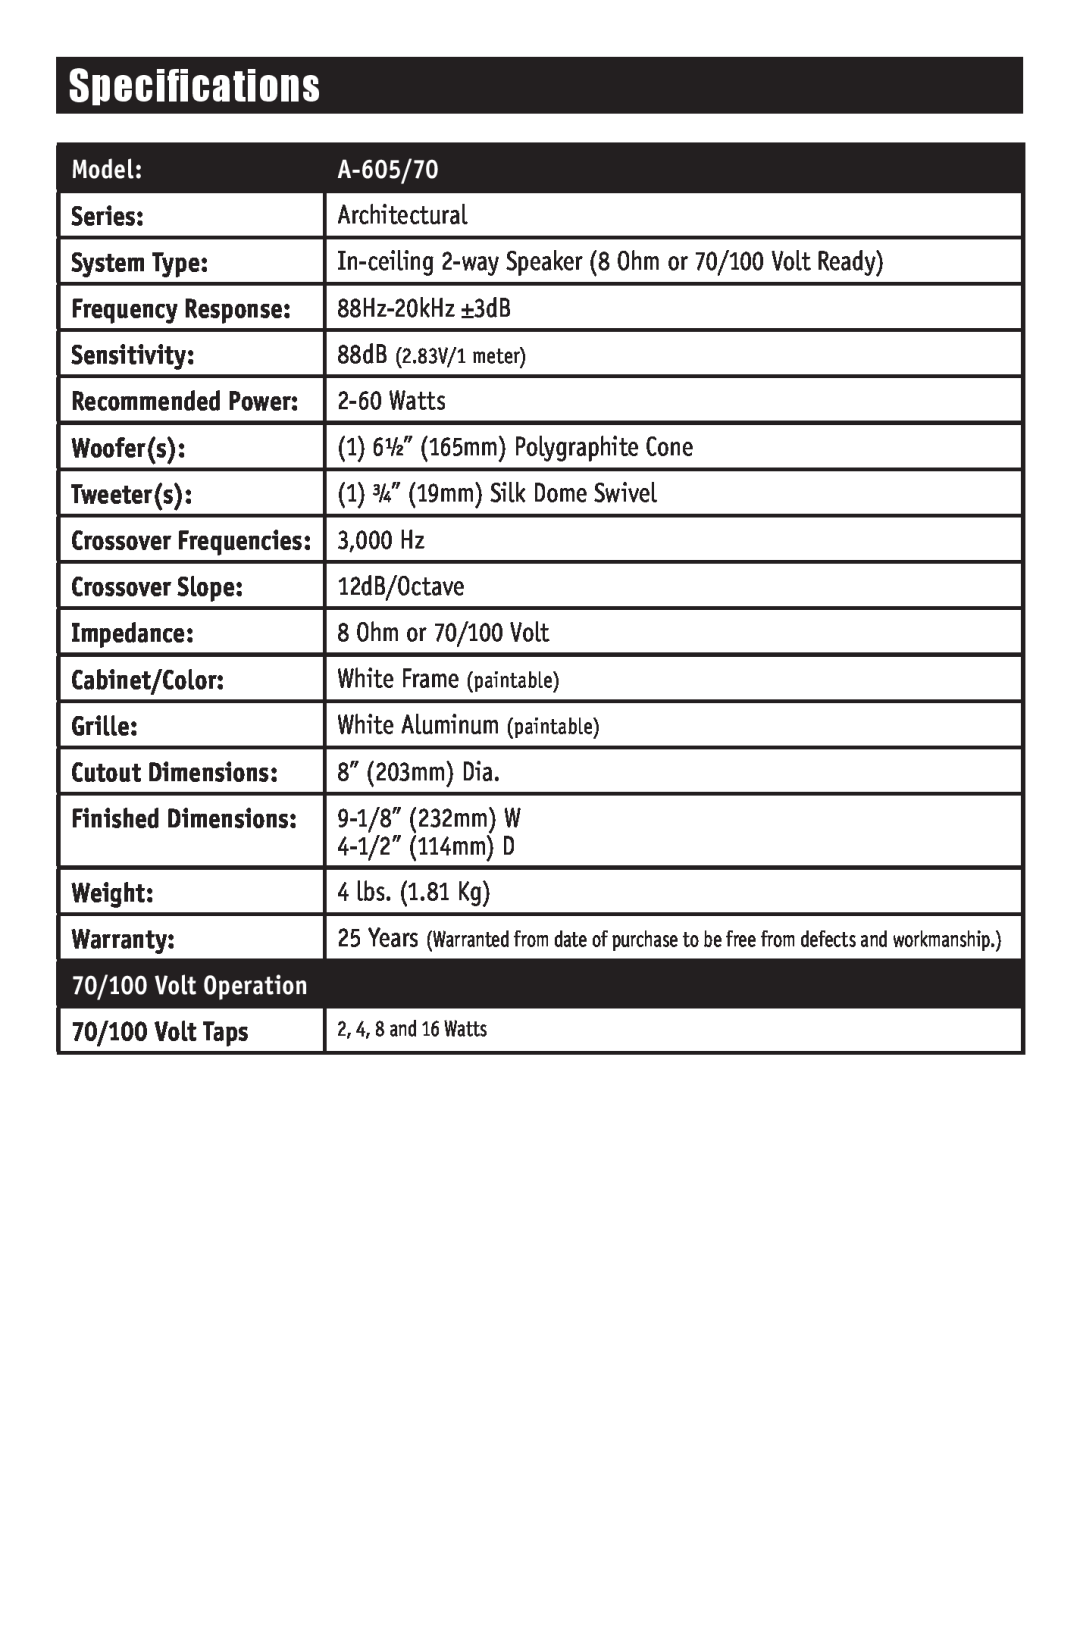 RBH Sound A-605/70 owner manual Specifications, Model 